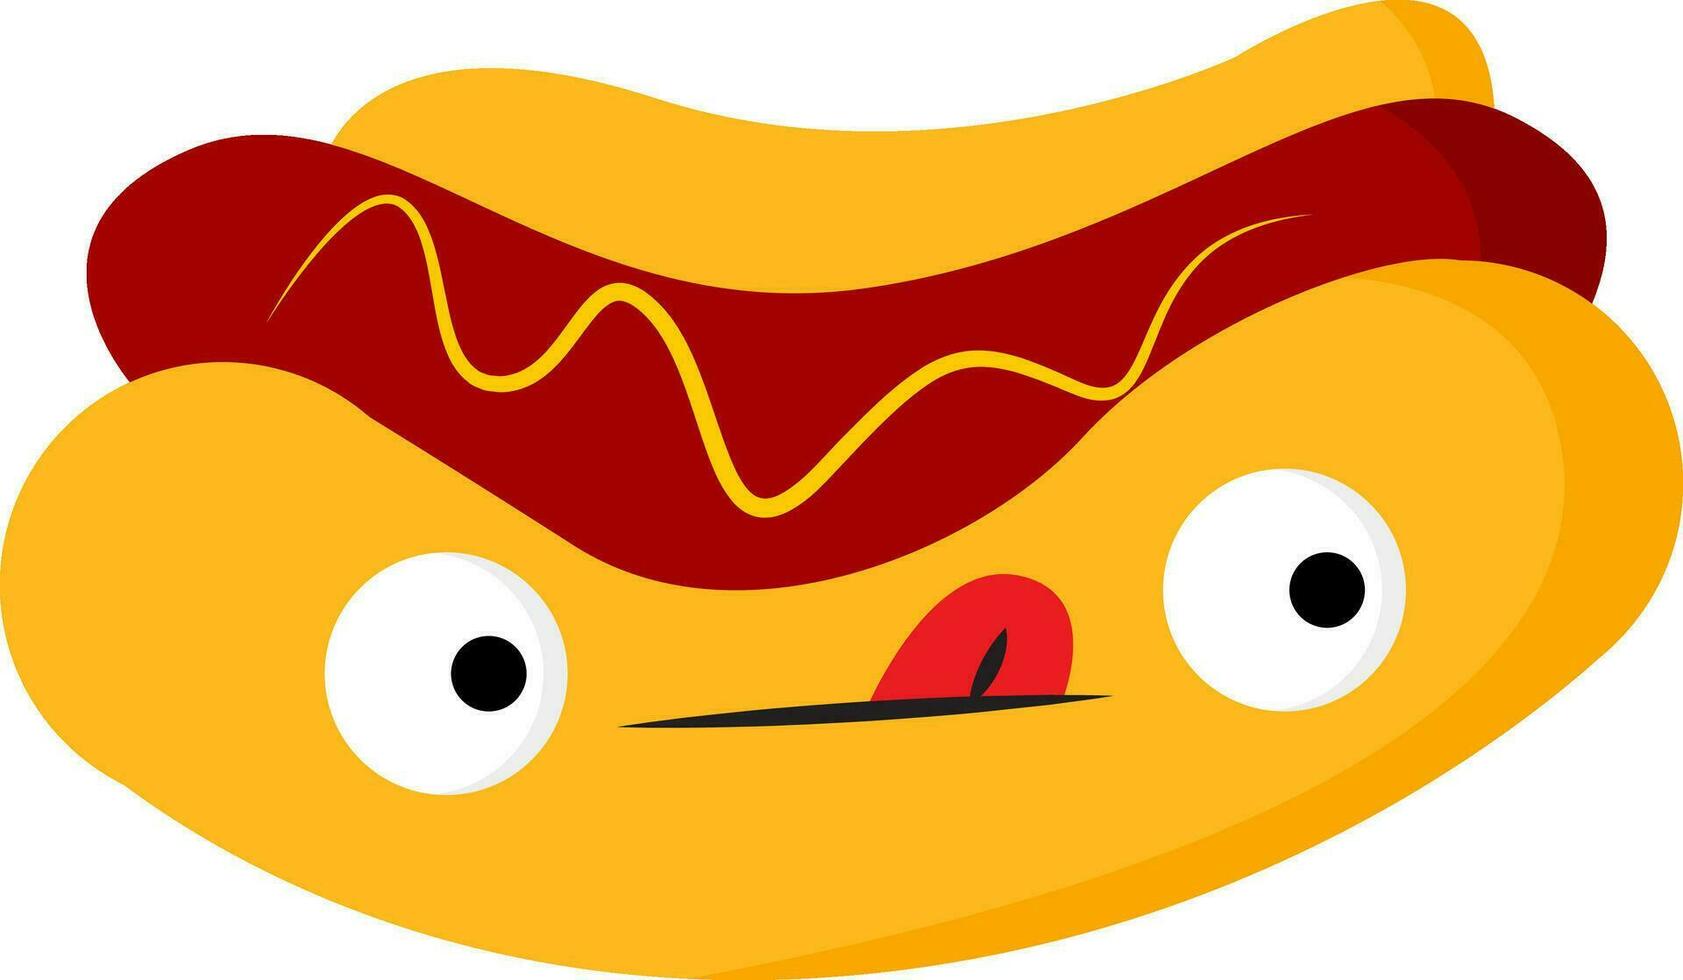 The cute and yummy hotdog vector or color illustration